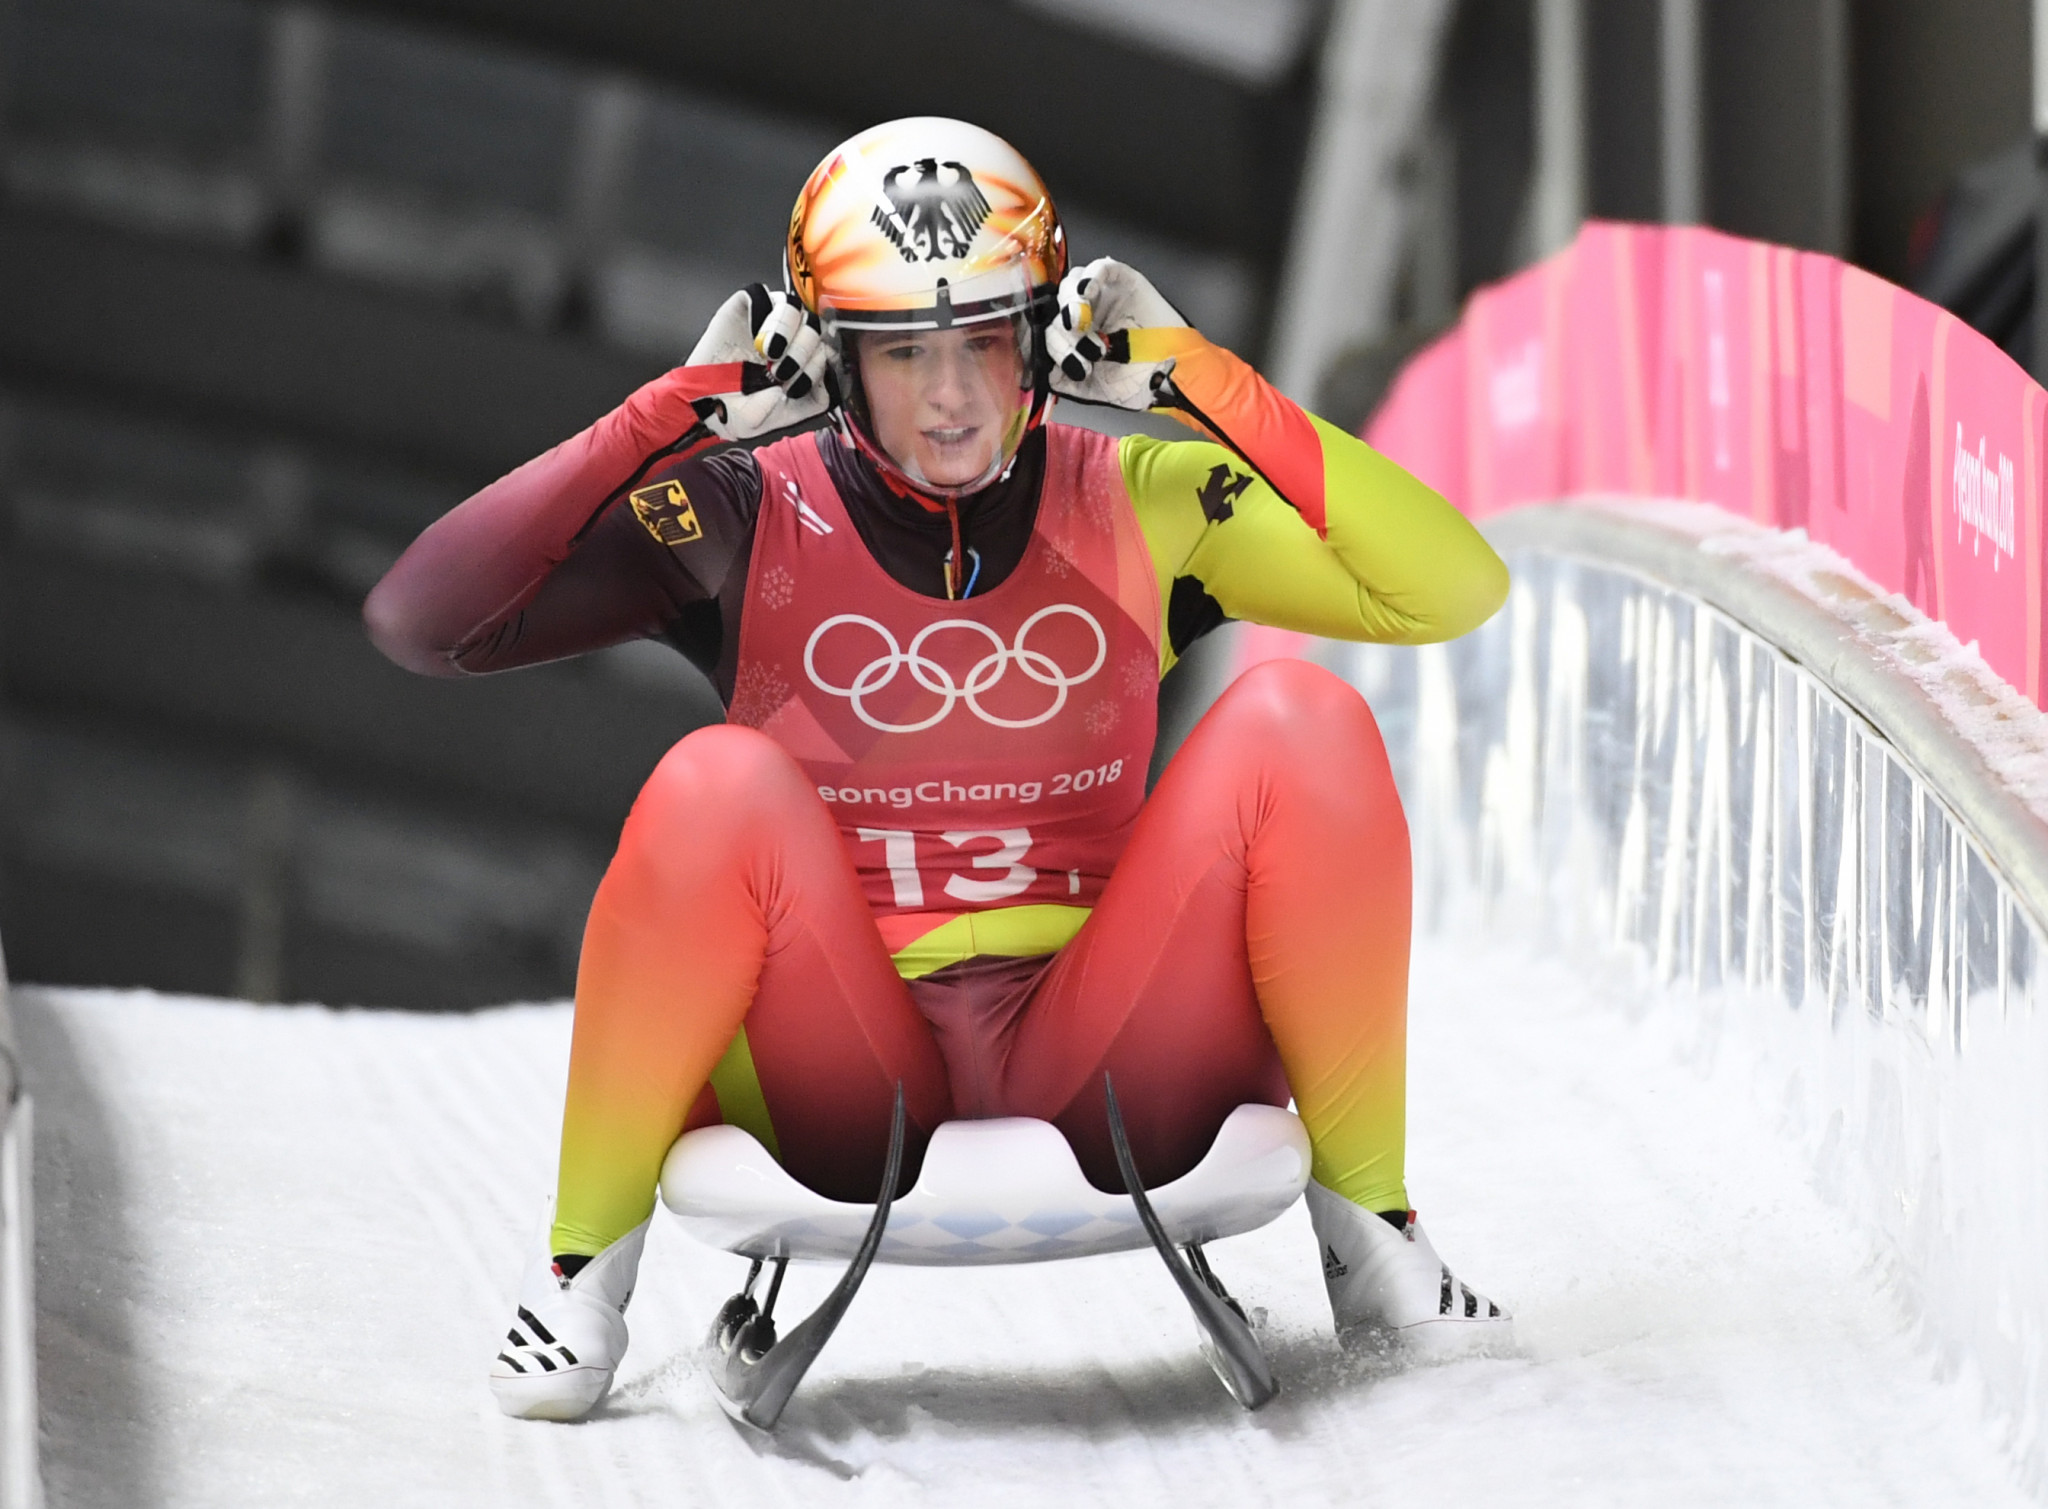 Geisenberger maintains perfect start to Luge World Cup season with victory in Whistler